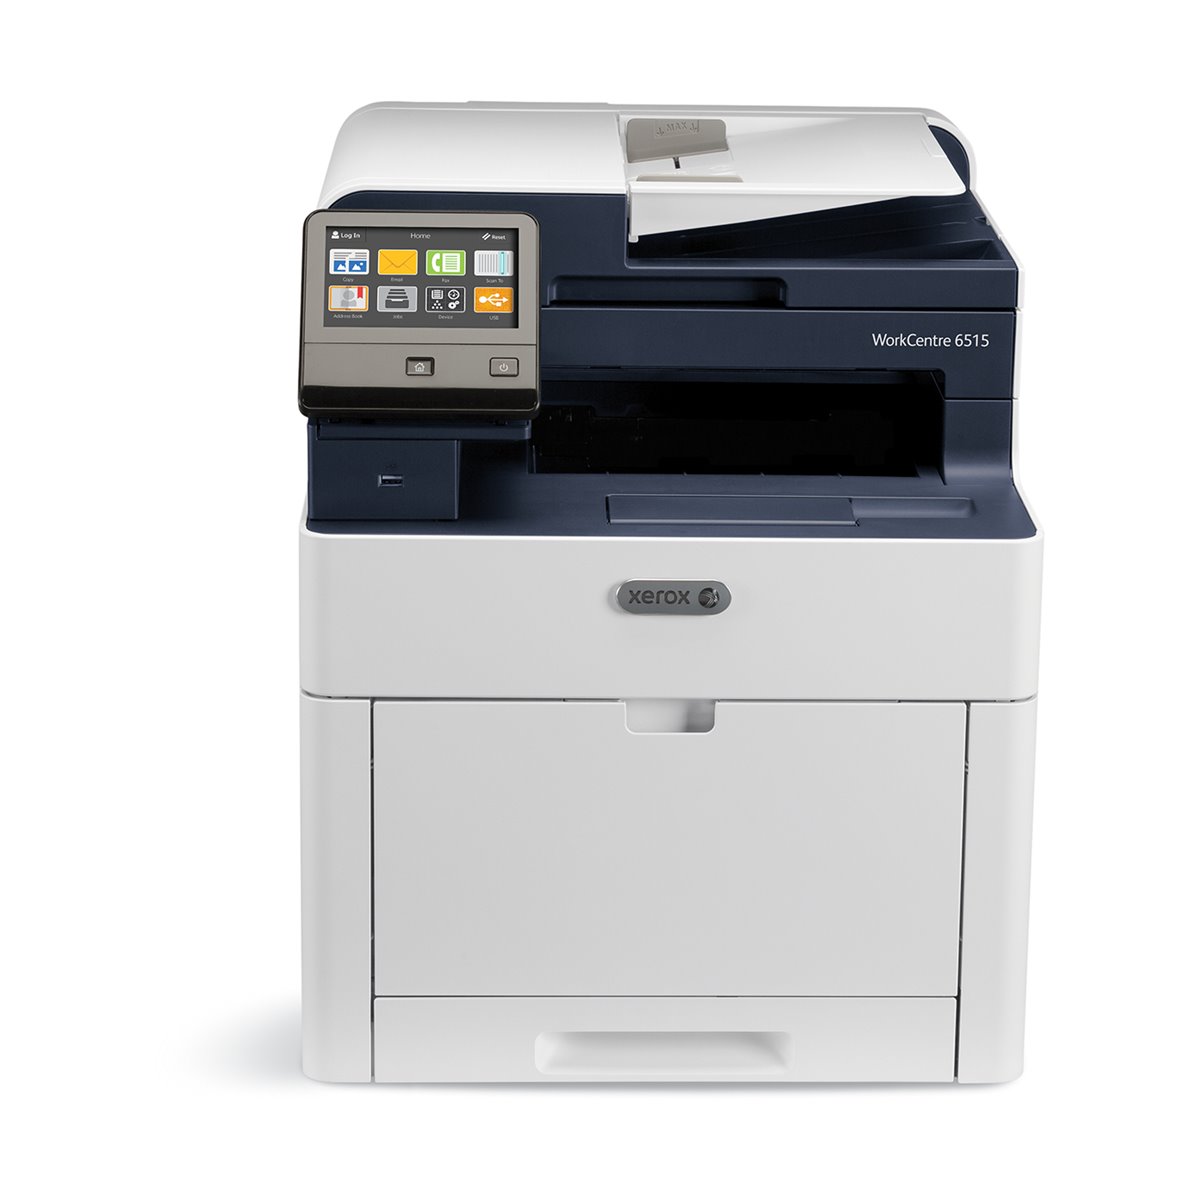 Xerox WorkCentre 6515 Colour Multifunction Printer - A4 - 28/28ppm - Duplex - USB/Ethernet/Wireless - Sold - Laser - Colour prin